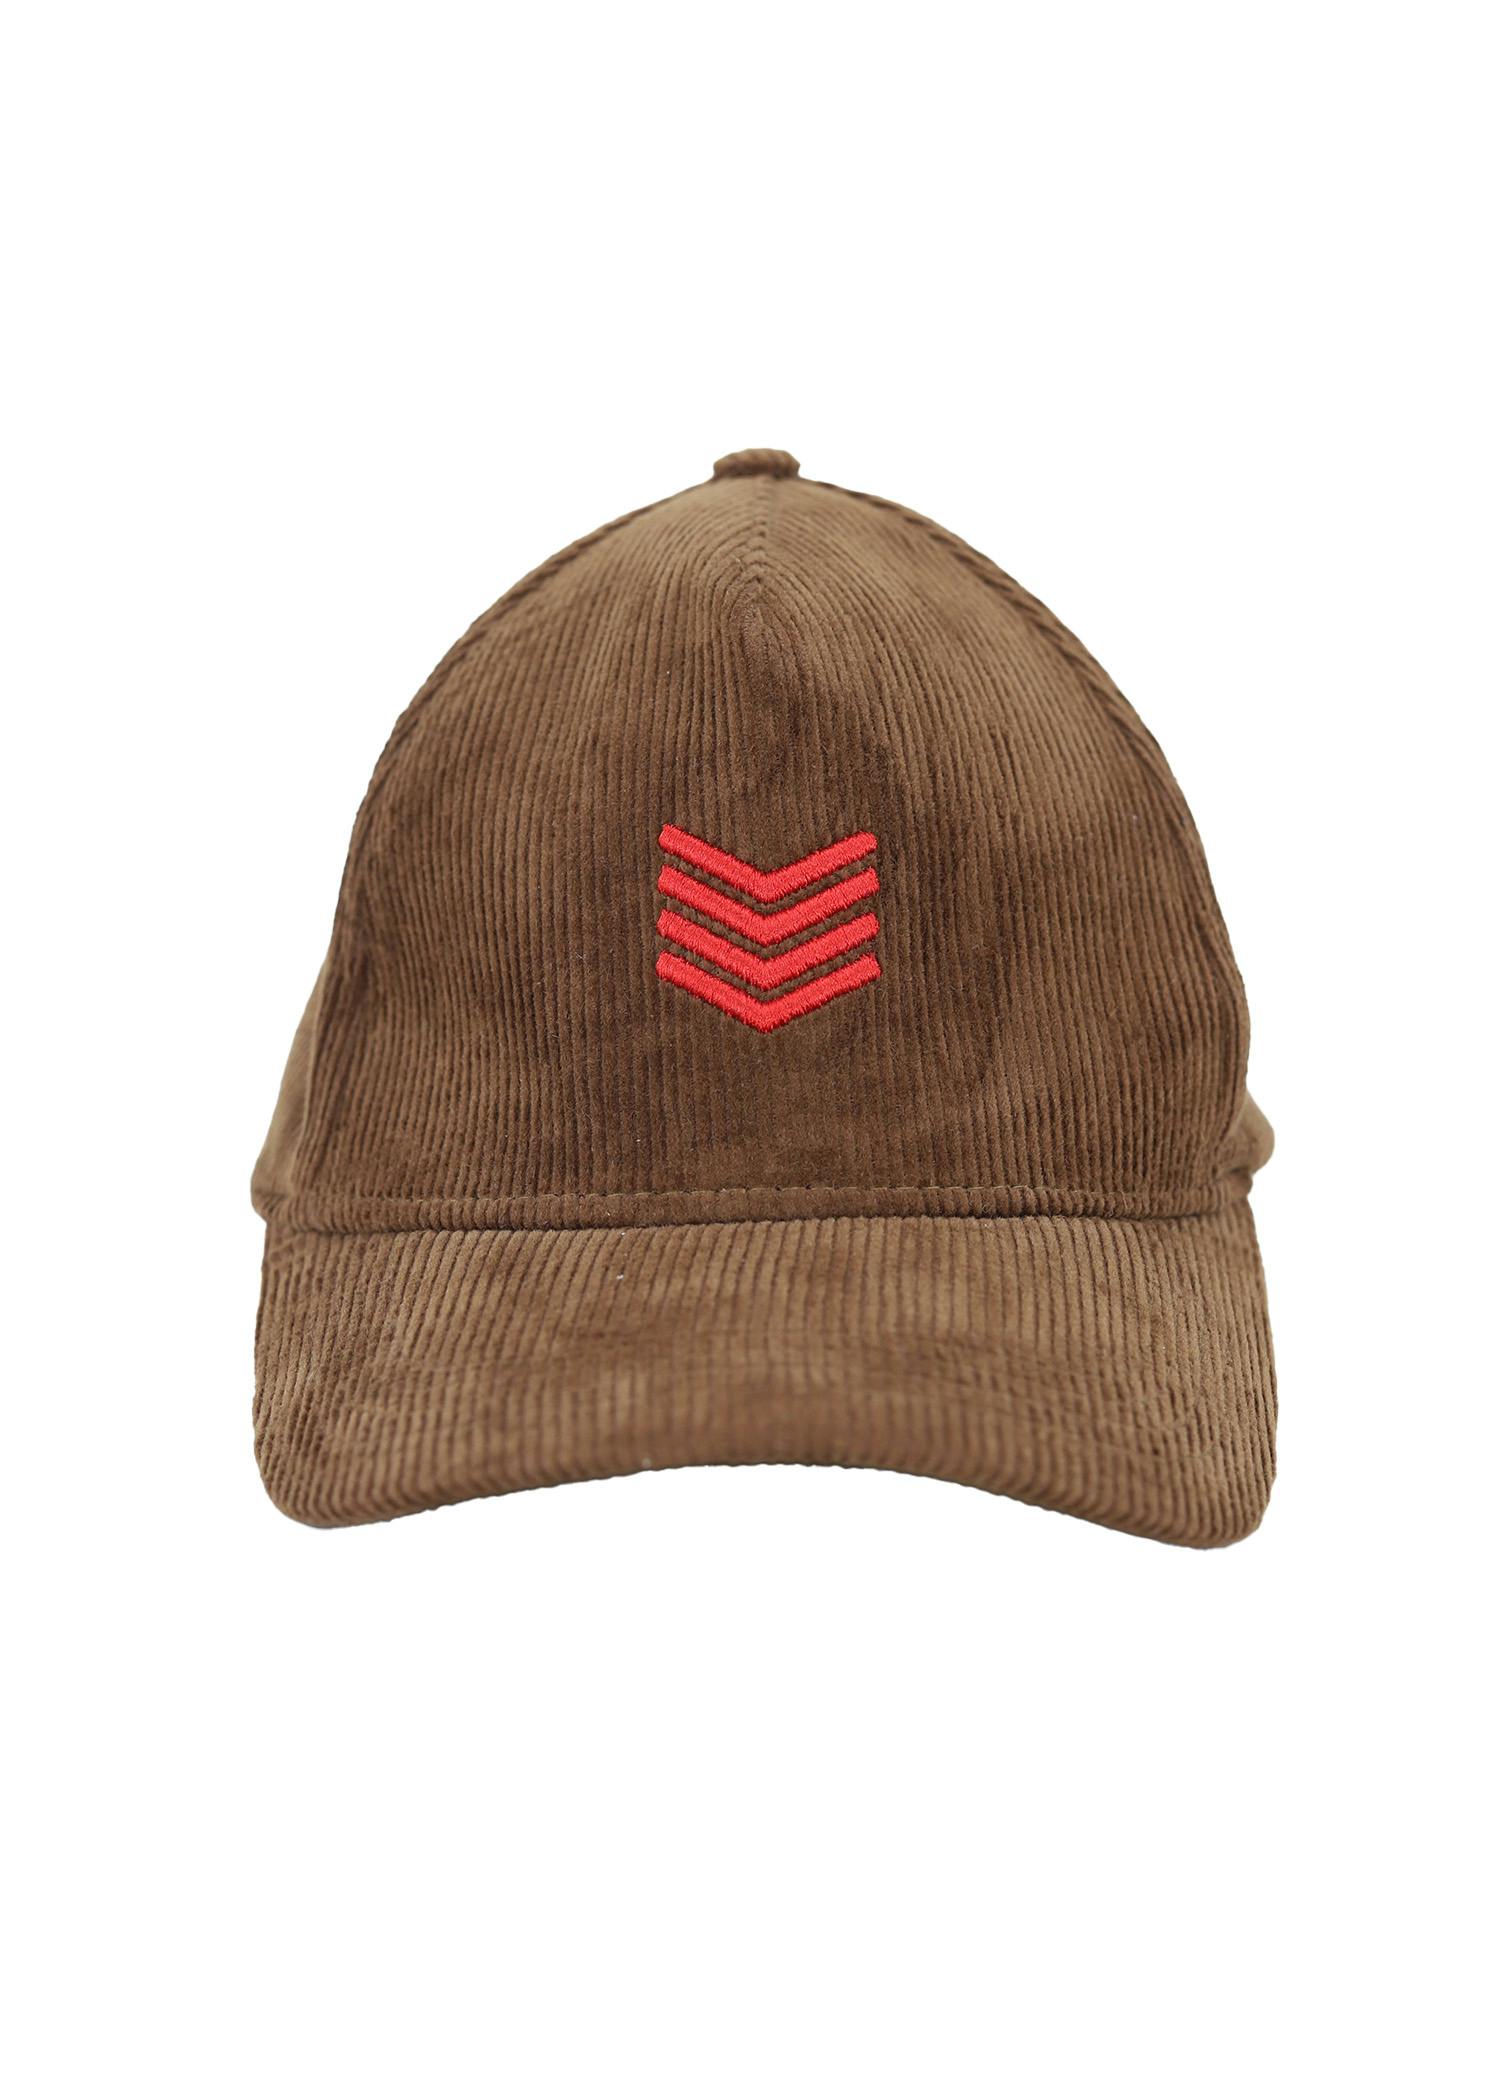 rooster cord cap brown color front view